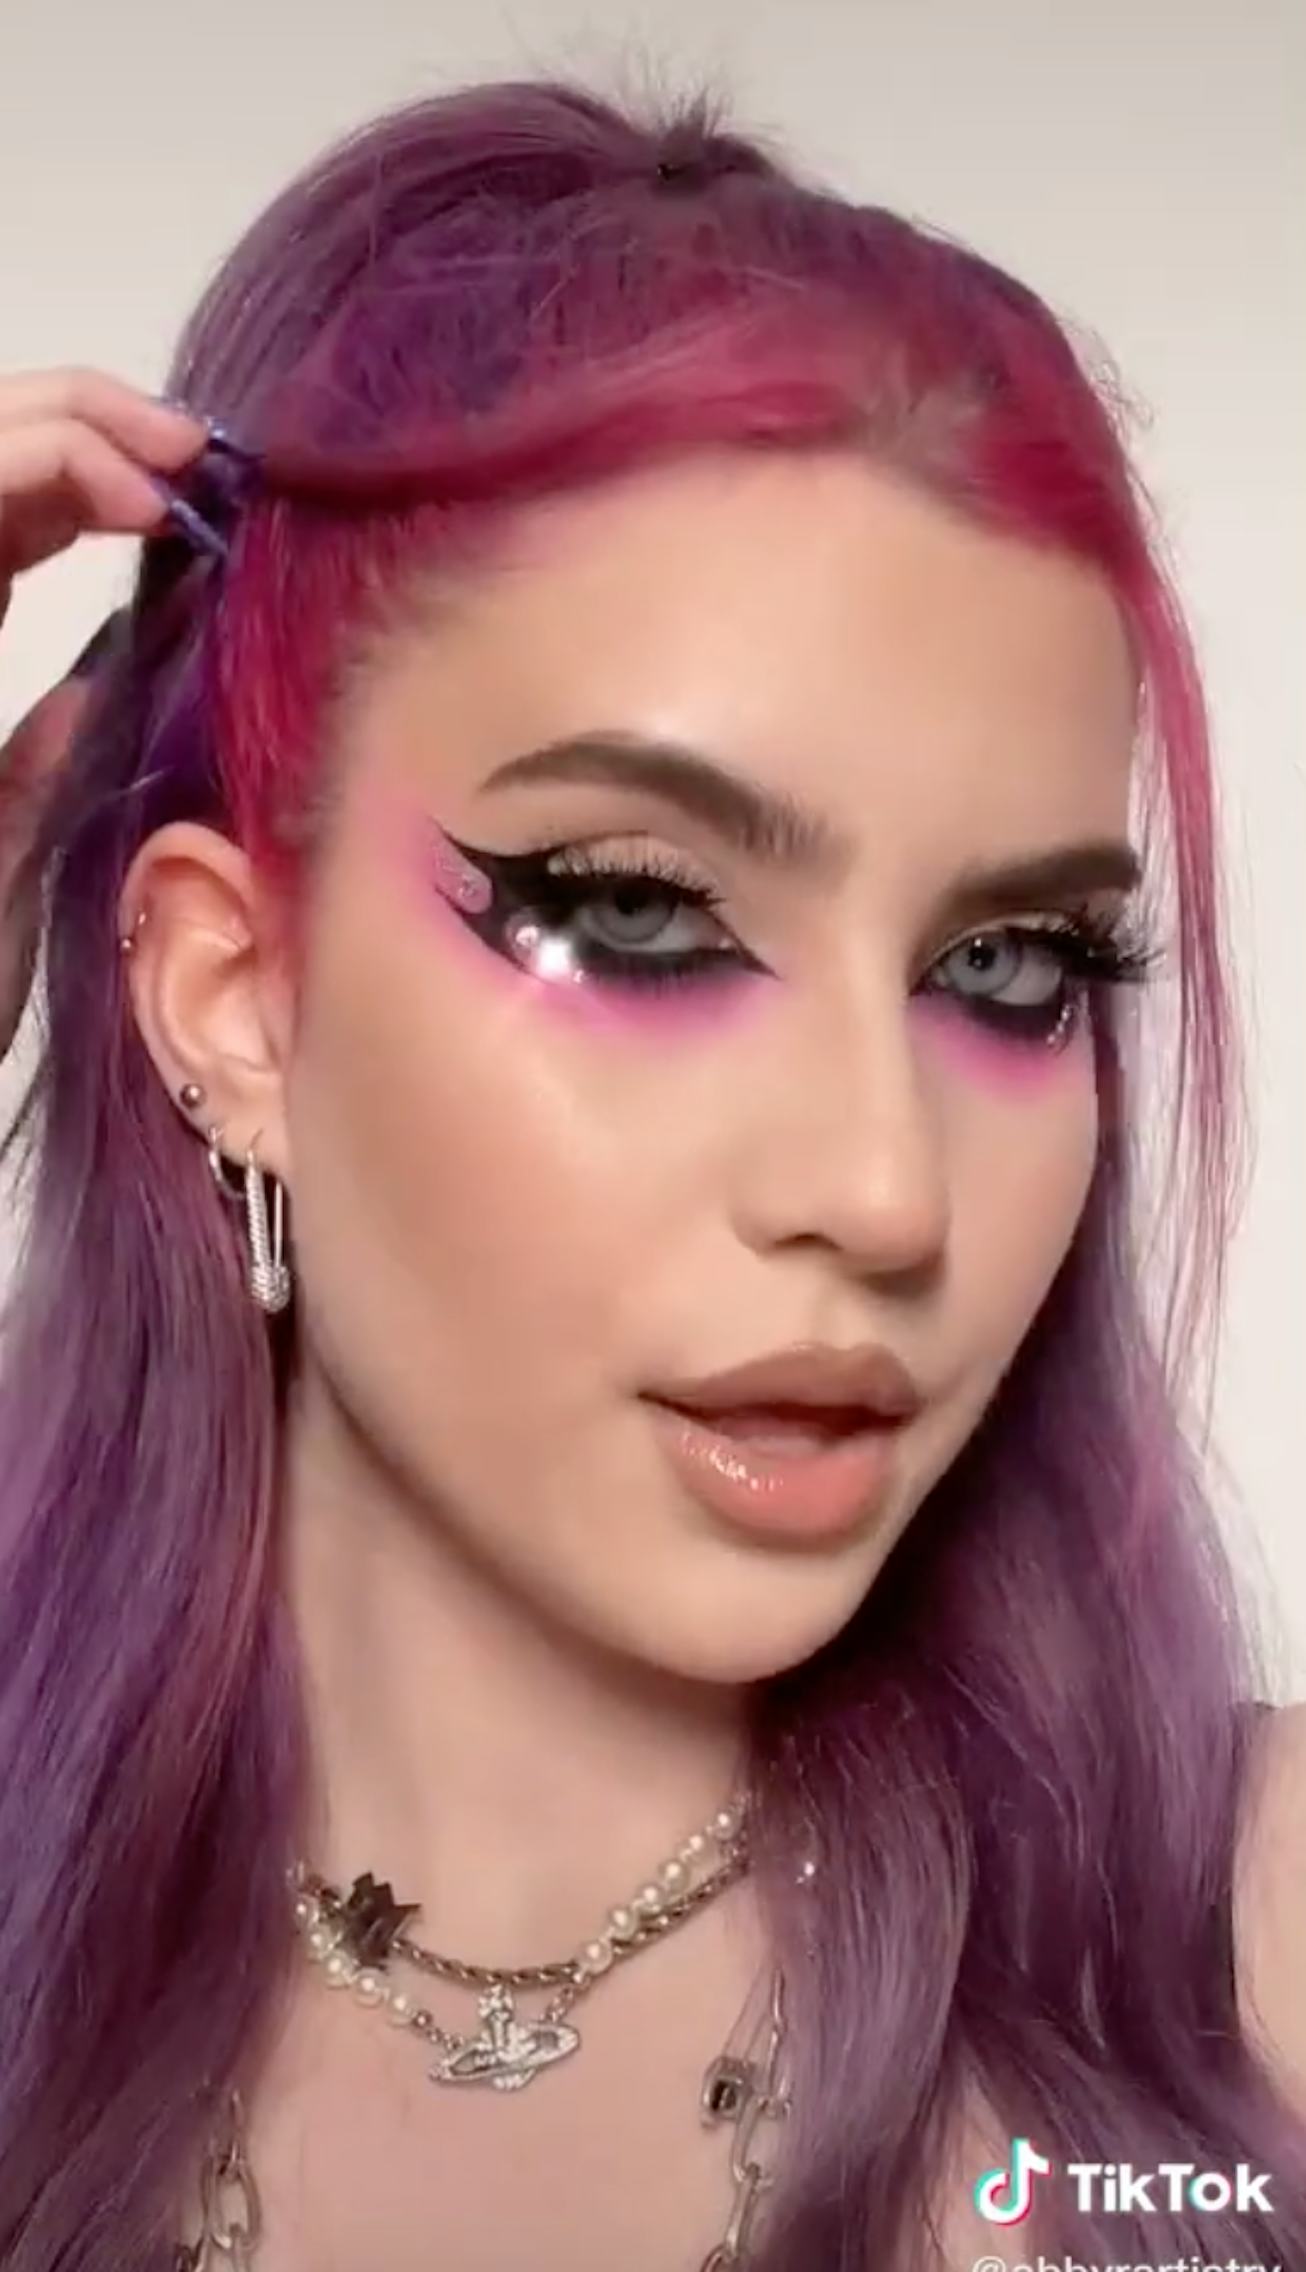 a-new-tiktok-trend-uses-makeup-to-create-exaggerated-under-eye-bags